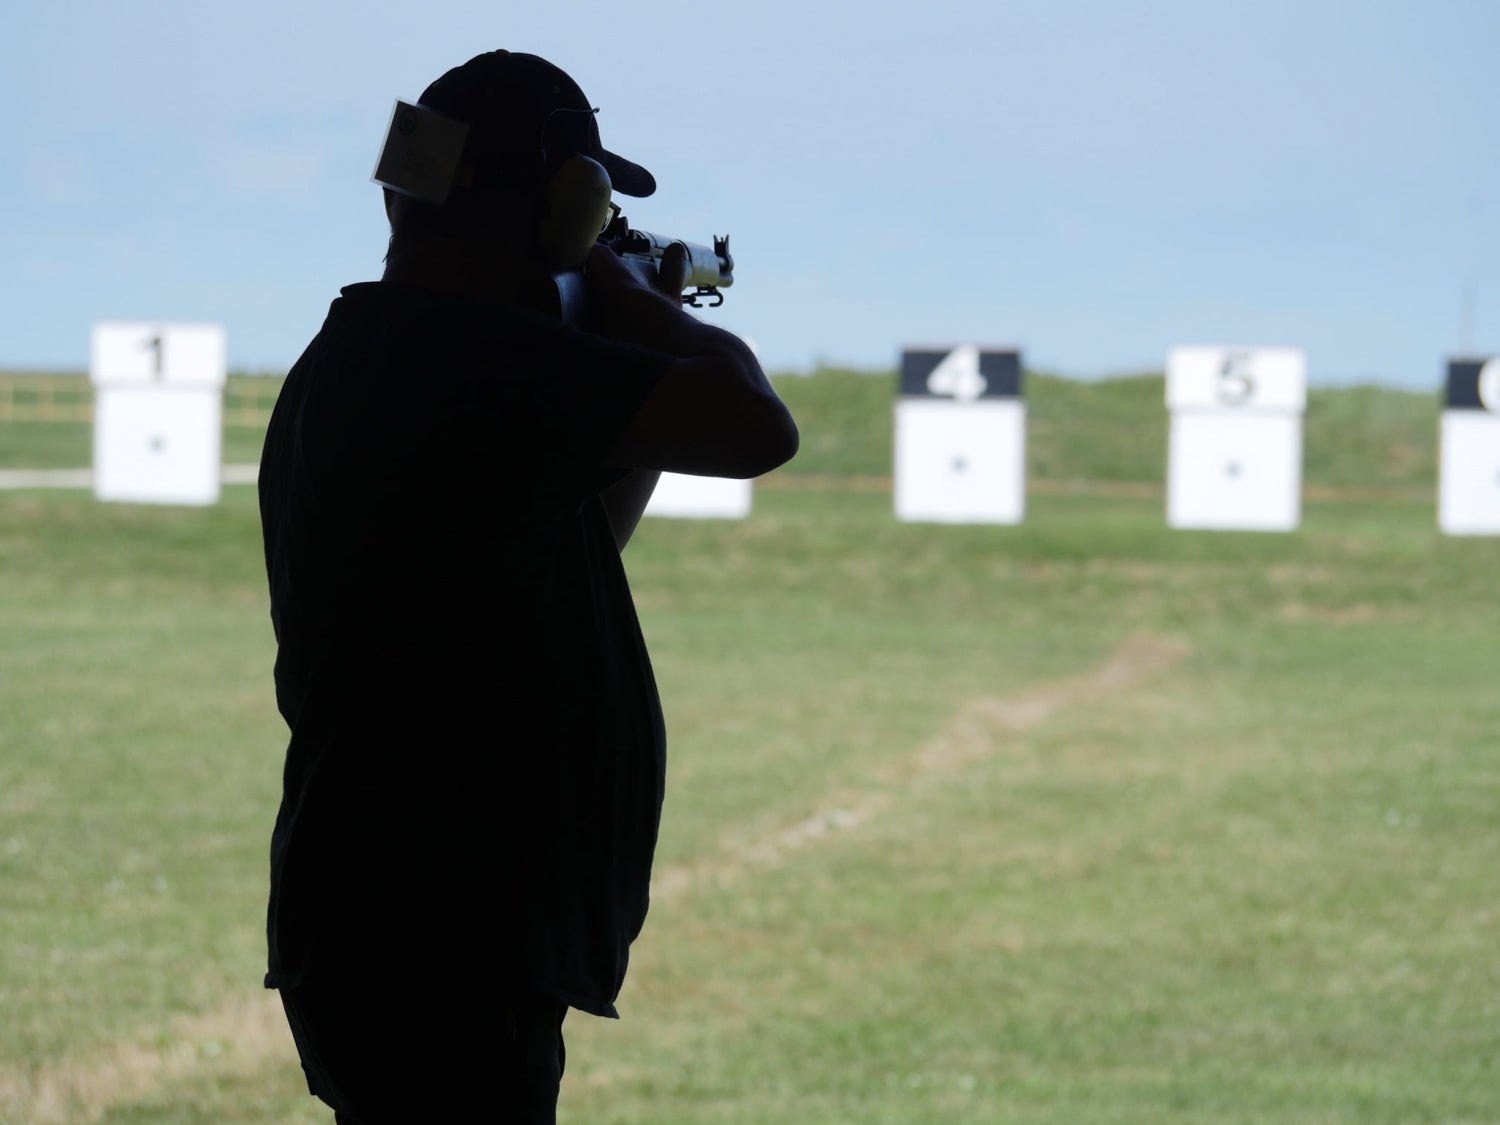 Rule Changes for 2020-2021 CMP Competitions Released